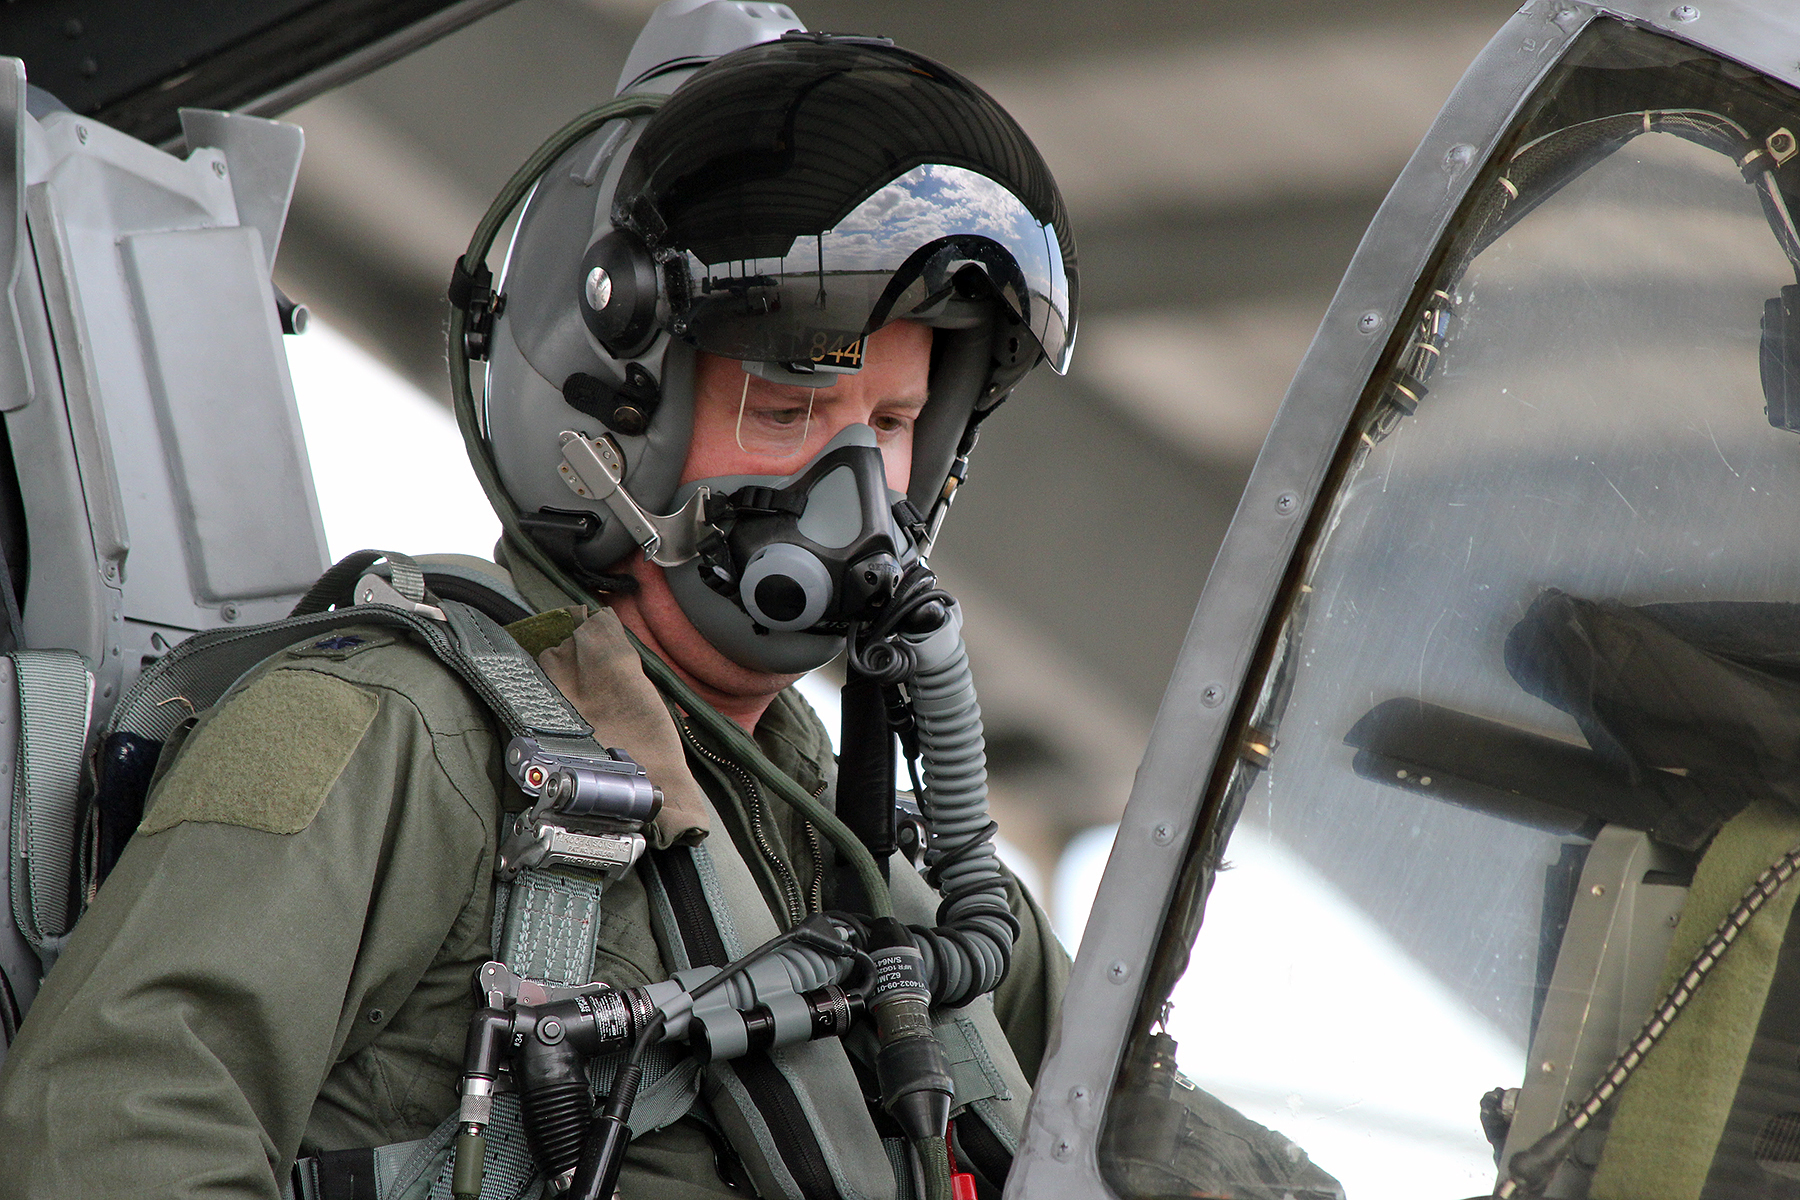 Lt. Col. Erik Simpson prepares to fly a training sortie in an A-10 Thunderbolt II at Selfridge Air National Guard Base, Mich., May 16, 2021. Simpson is a pilot with the 107th Fighter Squadron “Red Devils.” (U.S. Air National Guard photo by Master Sgt. Dan Heaton)